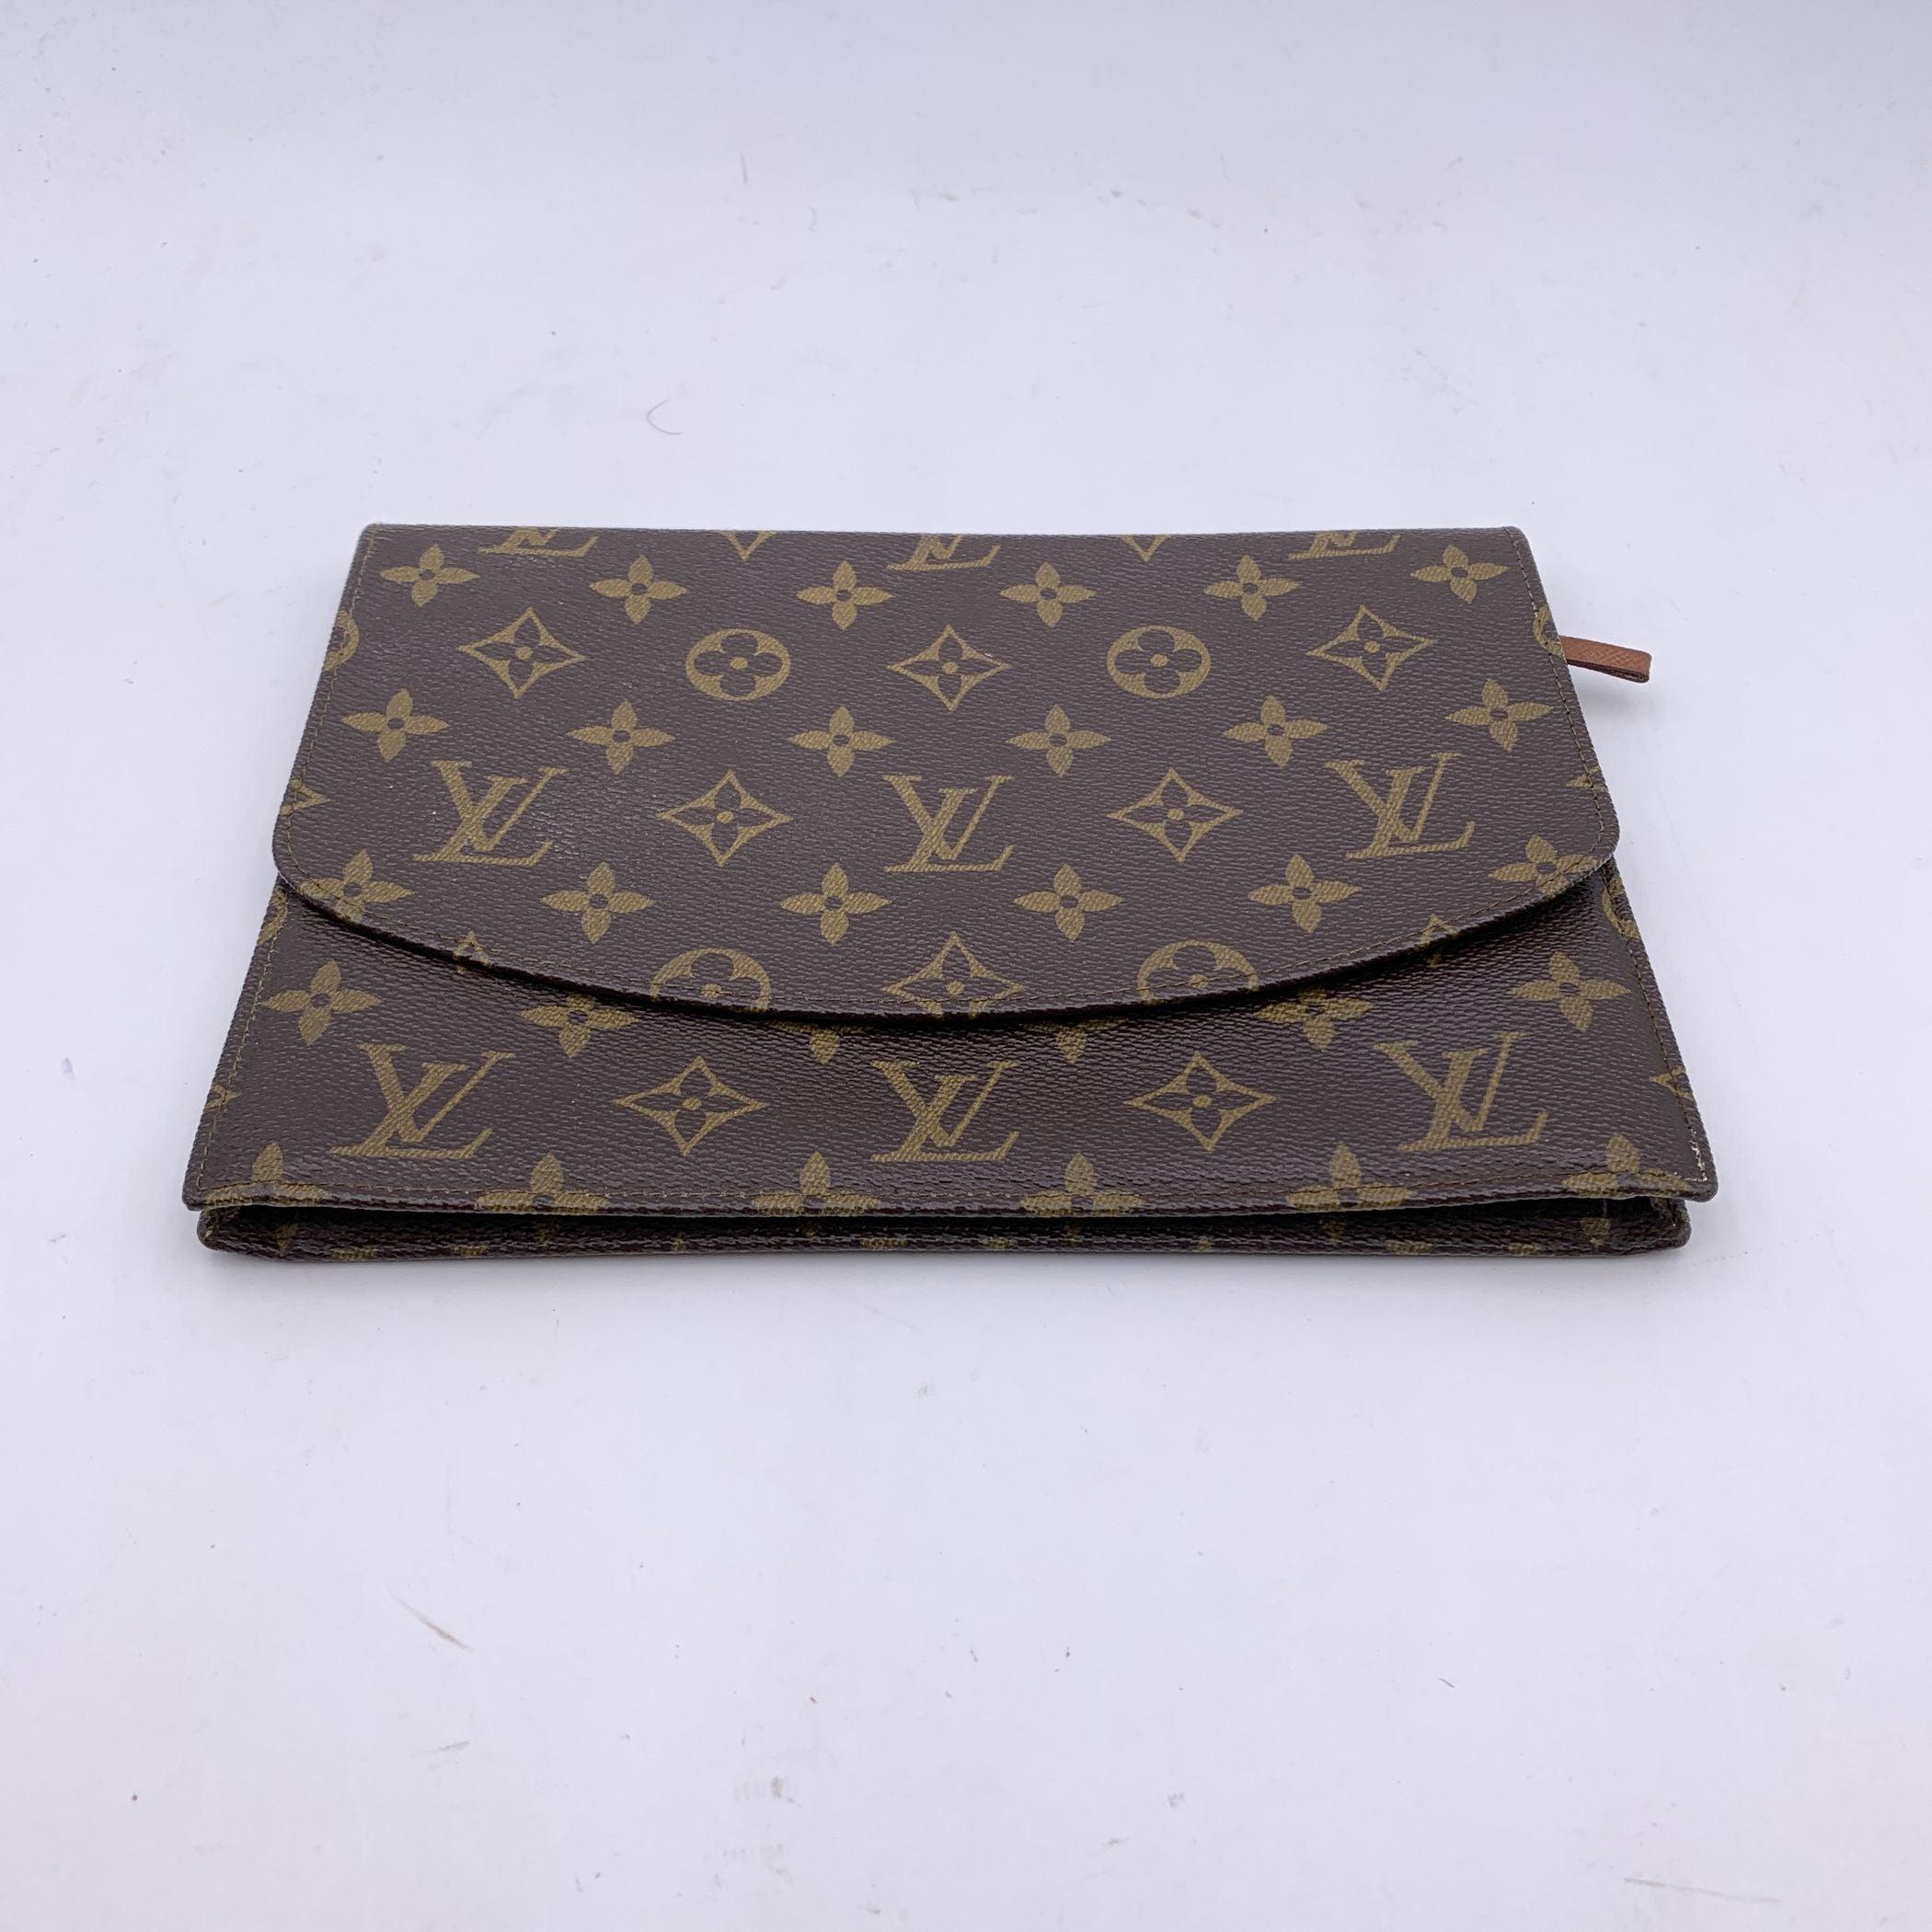 Vintage Louis Vuitton 'Rabat' clutch bag in brown monogram canvas. Flap with button closure on the front. 1 zip pocket under the flap. Leather lining. 1 open pocket on the reverse of the flap. Leather interior. 'LOUIS VUITTON Paris - made in France'